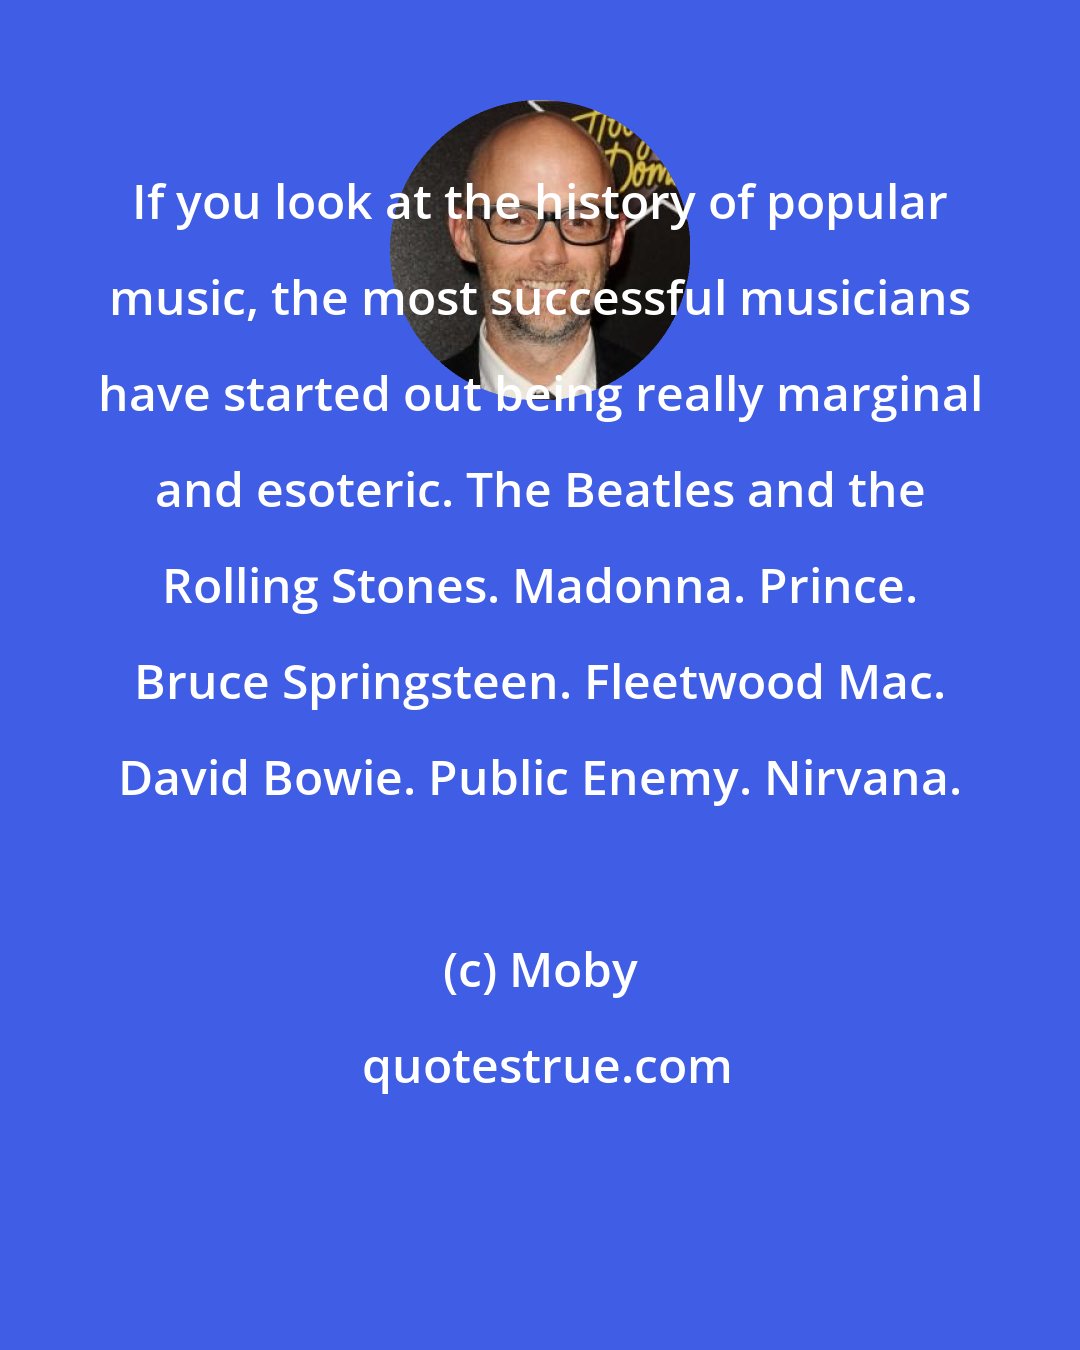 Moby: If you look at the history of popular music, the most successful musicians have started out being really marginal and esoteric. The Beatles and the Rolling Stones. Madonna. Prince. Bruce Springsteen. Fleetwood Mac. David Bowie. Public Enemy. Nirvana.